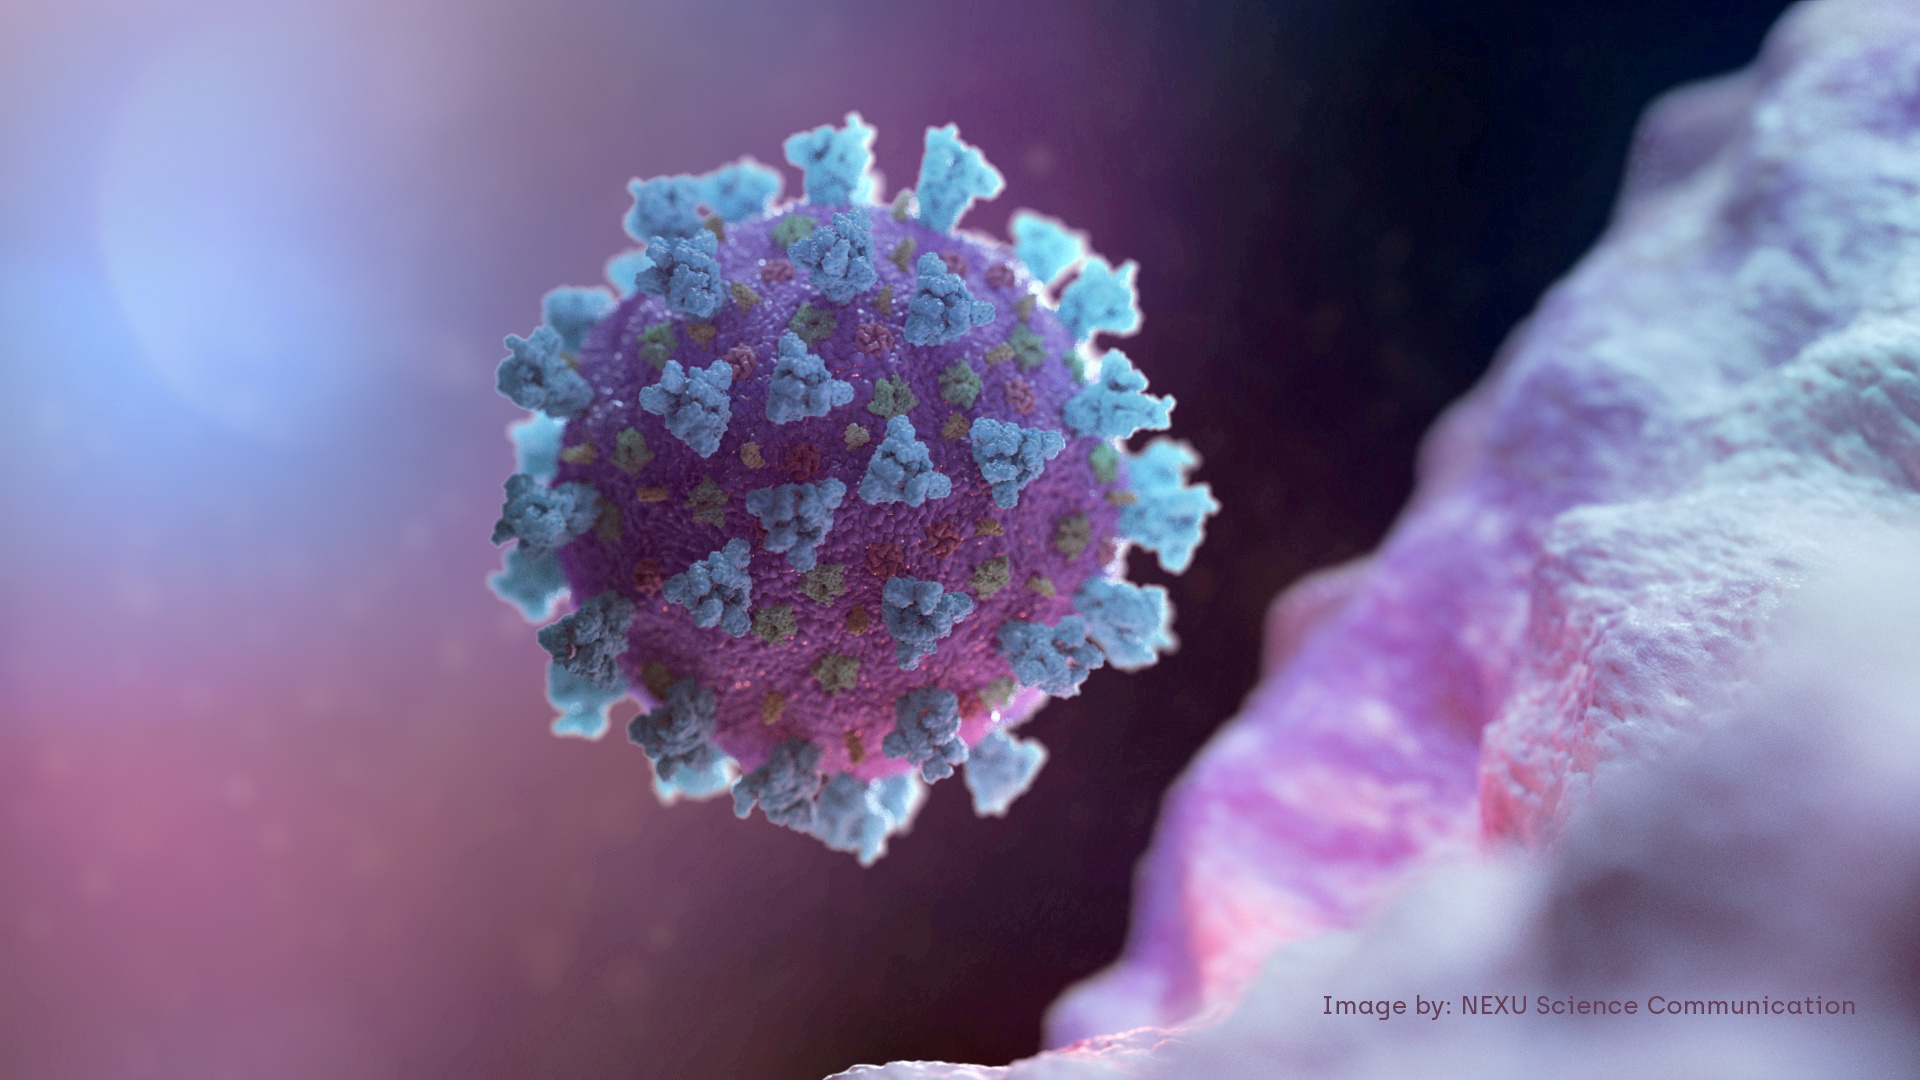 A computer image created by Nexu Science Communication with Trinity College  shows a model structurally representative of a betacoronavirus, the type of virus linked to COVID-19